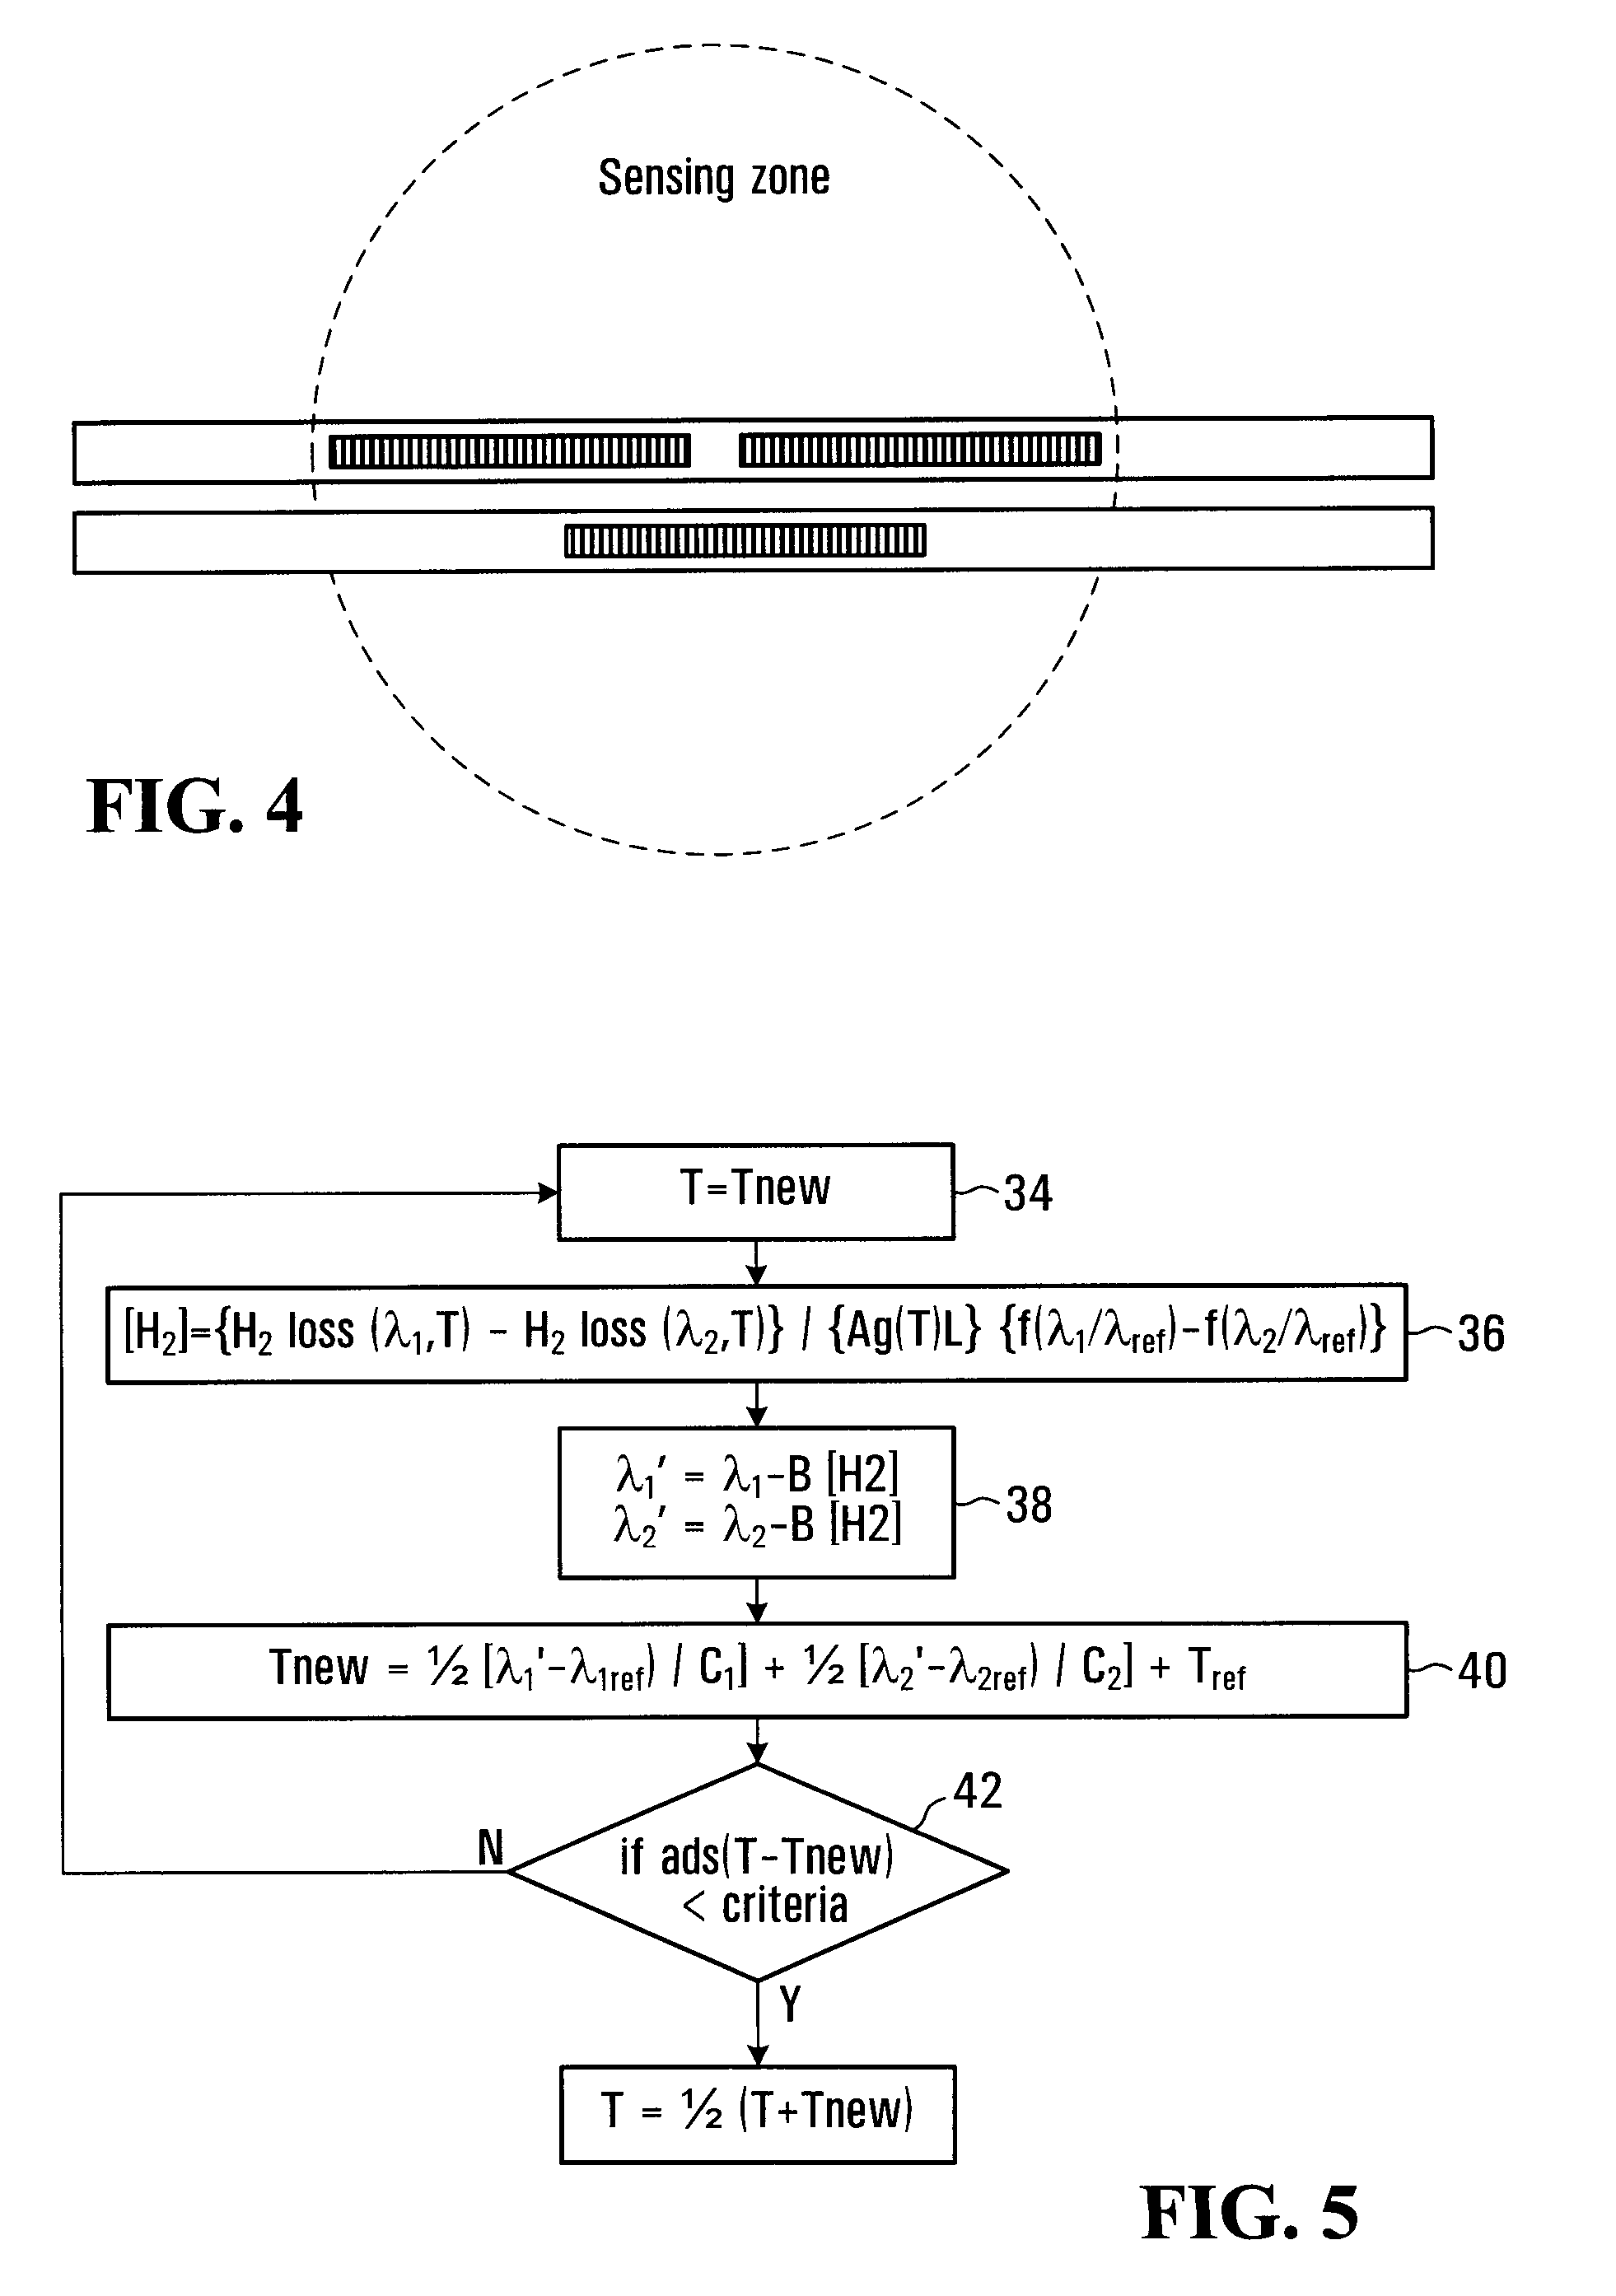 Optical Device for Measuring a Physical Parameter in a Hydrogen Contaminated Sensing Zone